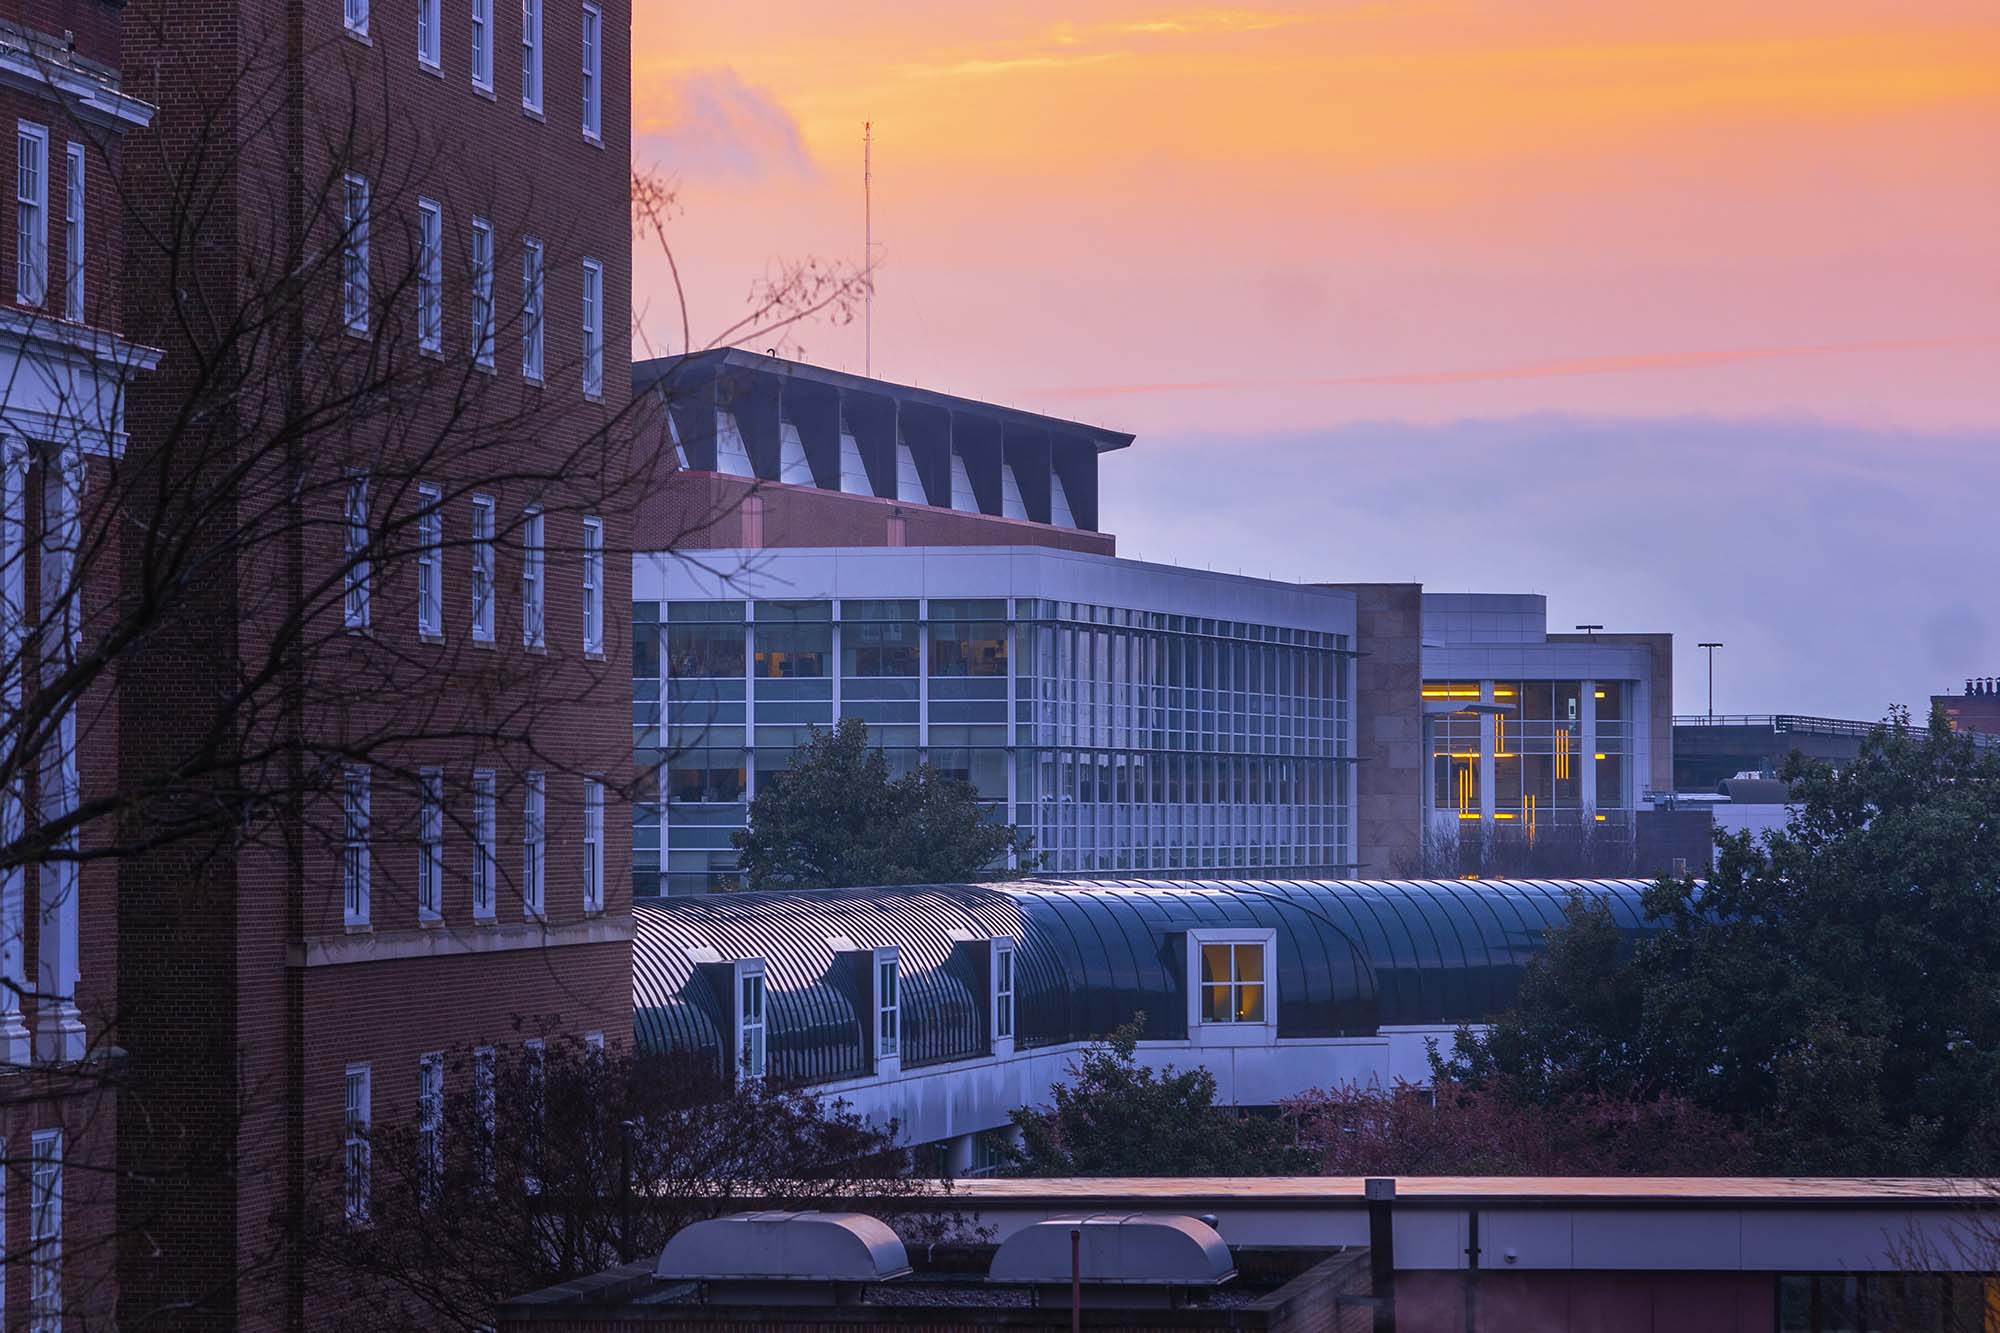 View of the hospital against a yellow, orange, blue, and purple sunset